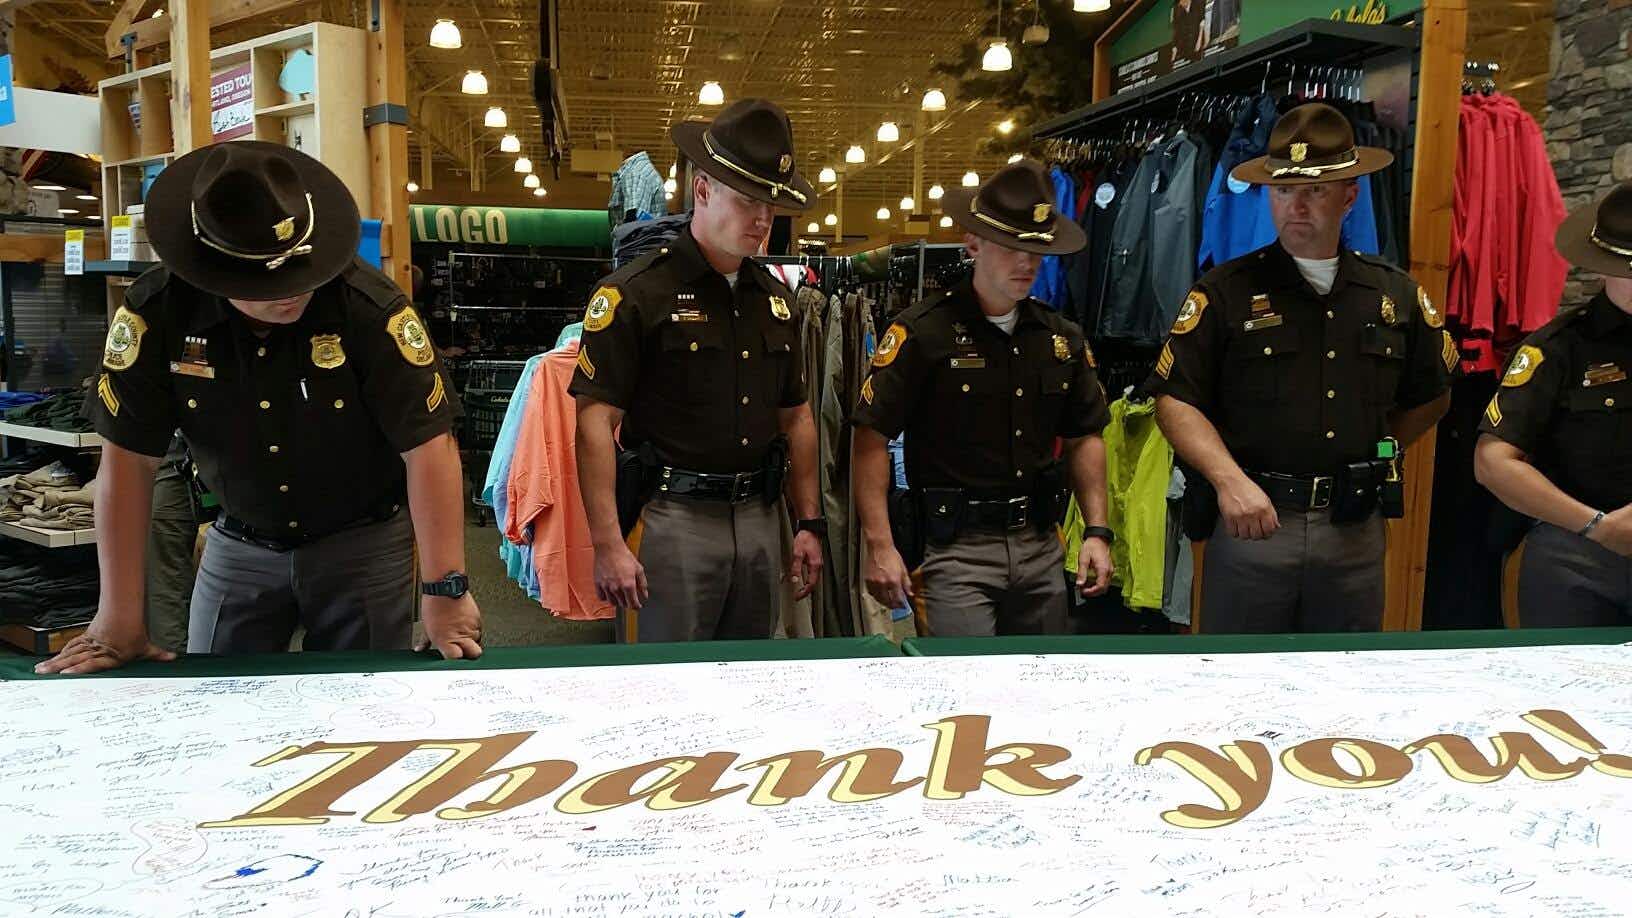 A group of law enforcement standing inside a Cabela's store.